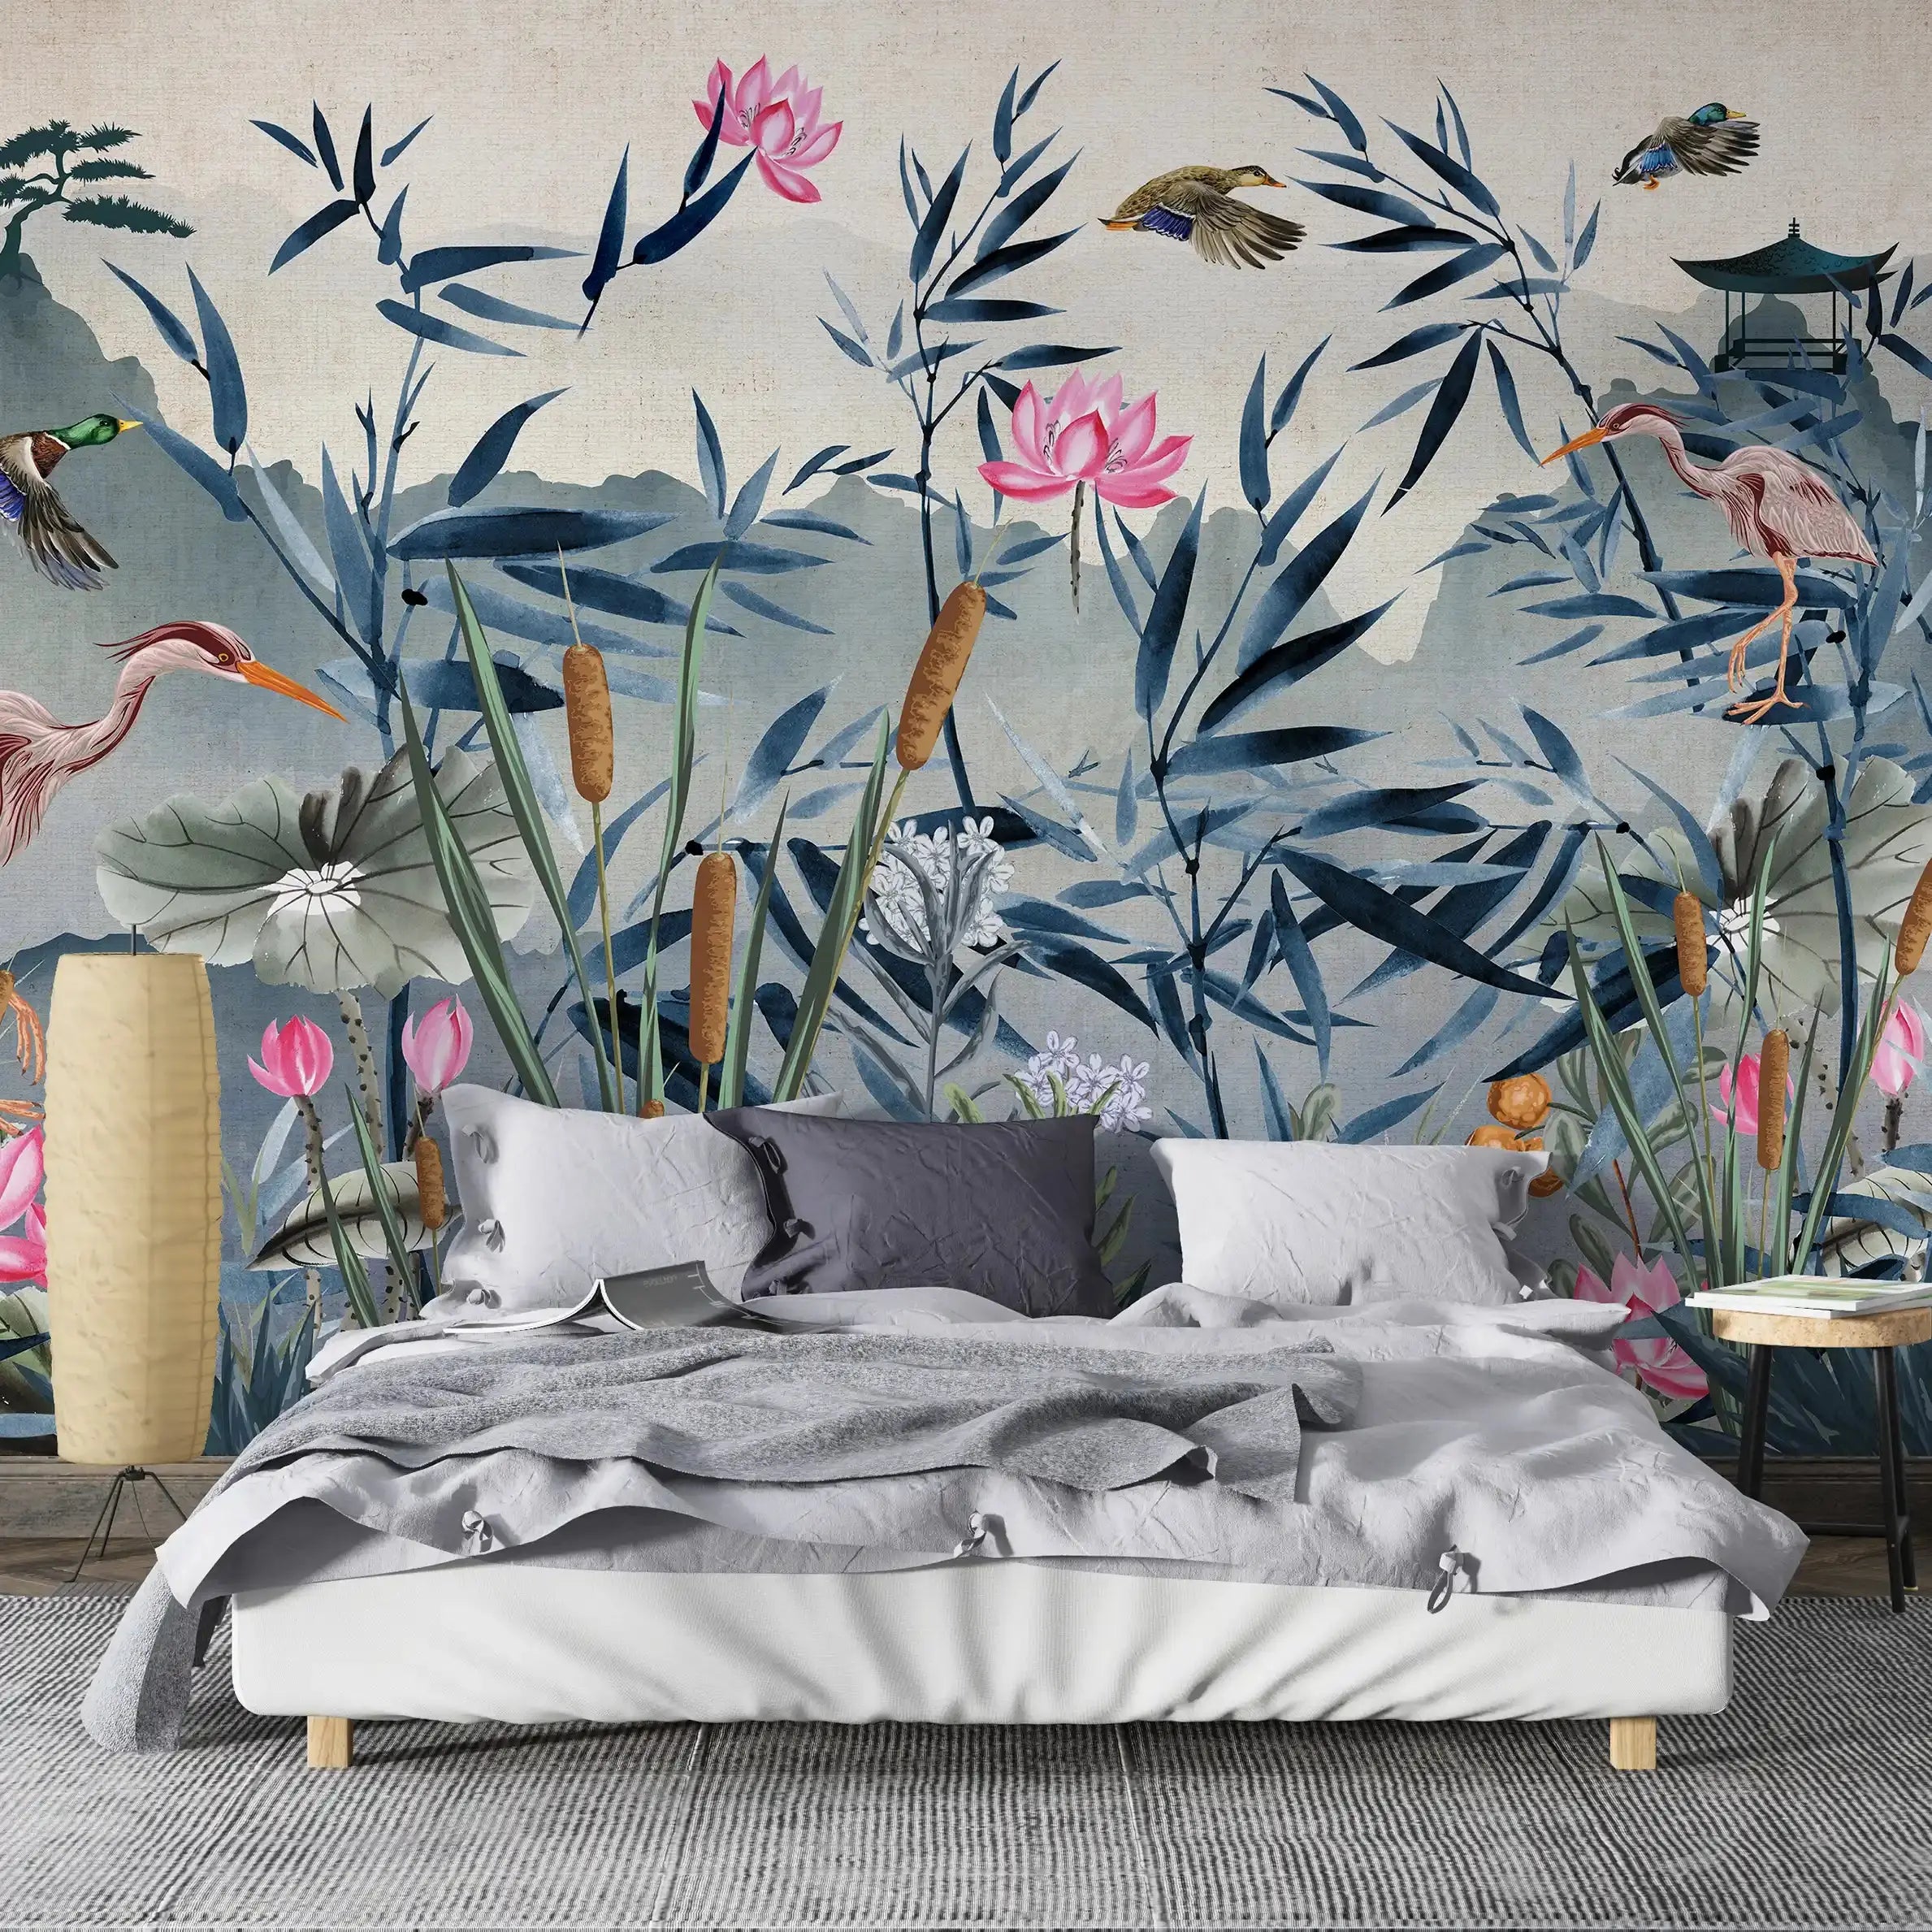 3057-A / Removable Wallpaper Peel and Stick - Watercolor Birds and Flowers, Oriental Painting Inspired, Easy Install, Wall Decor - Artevella